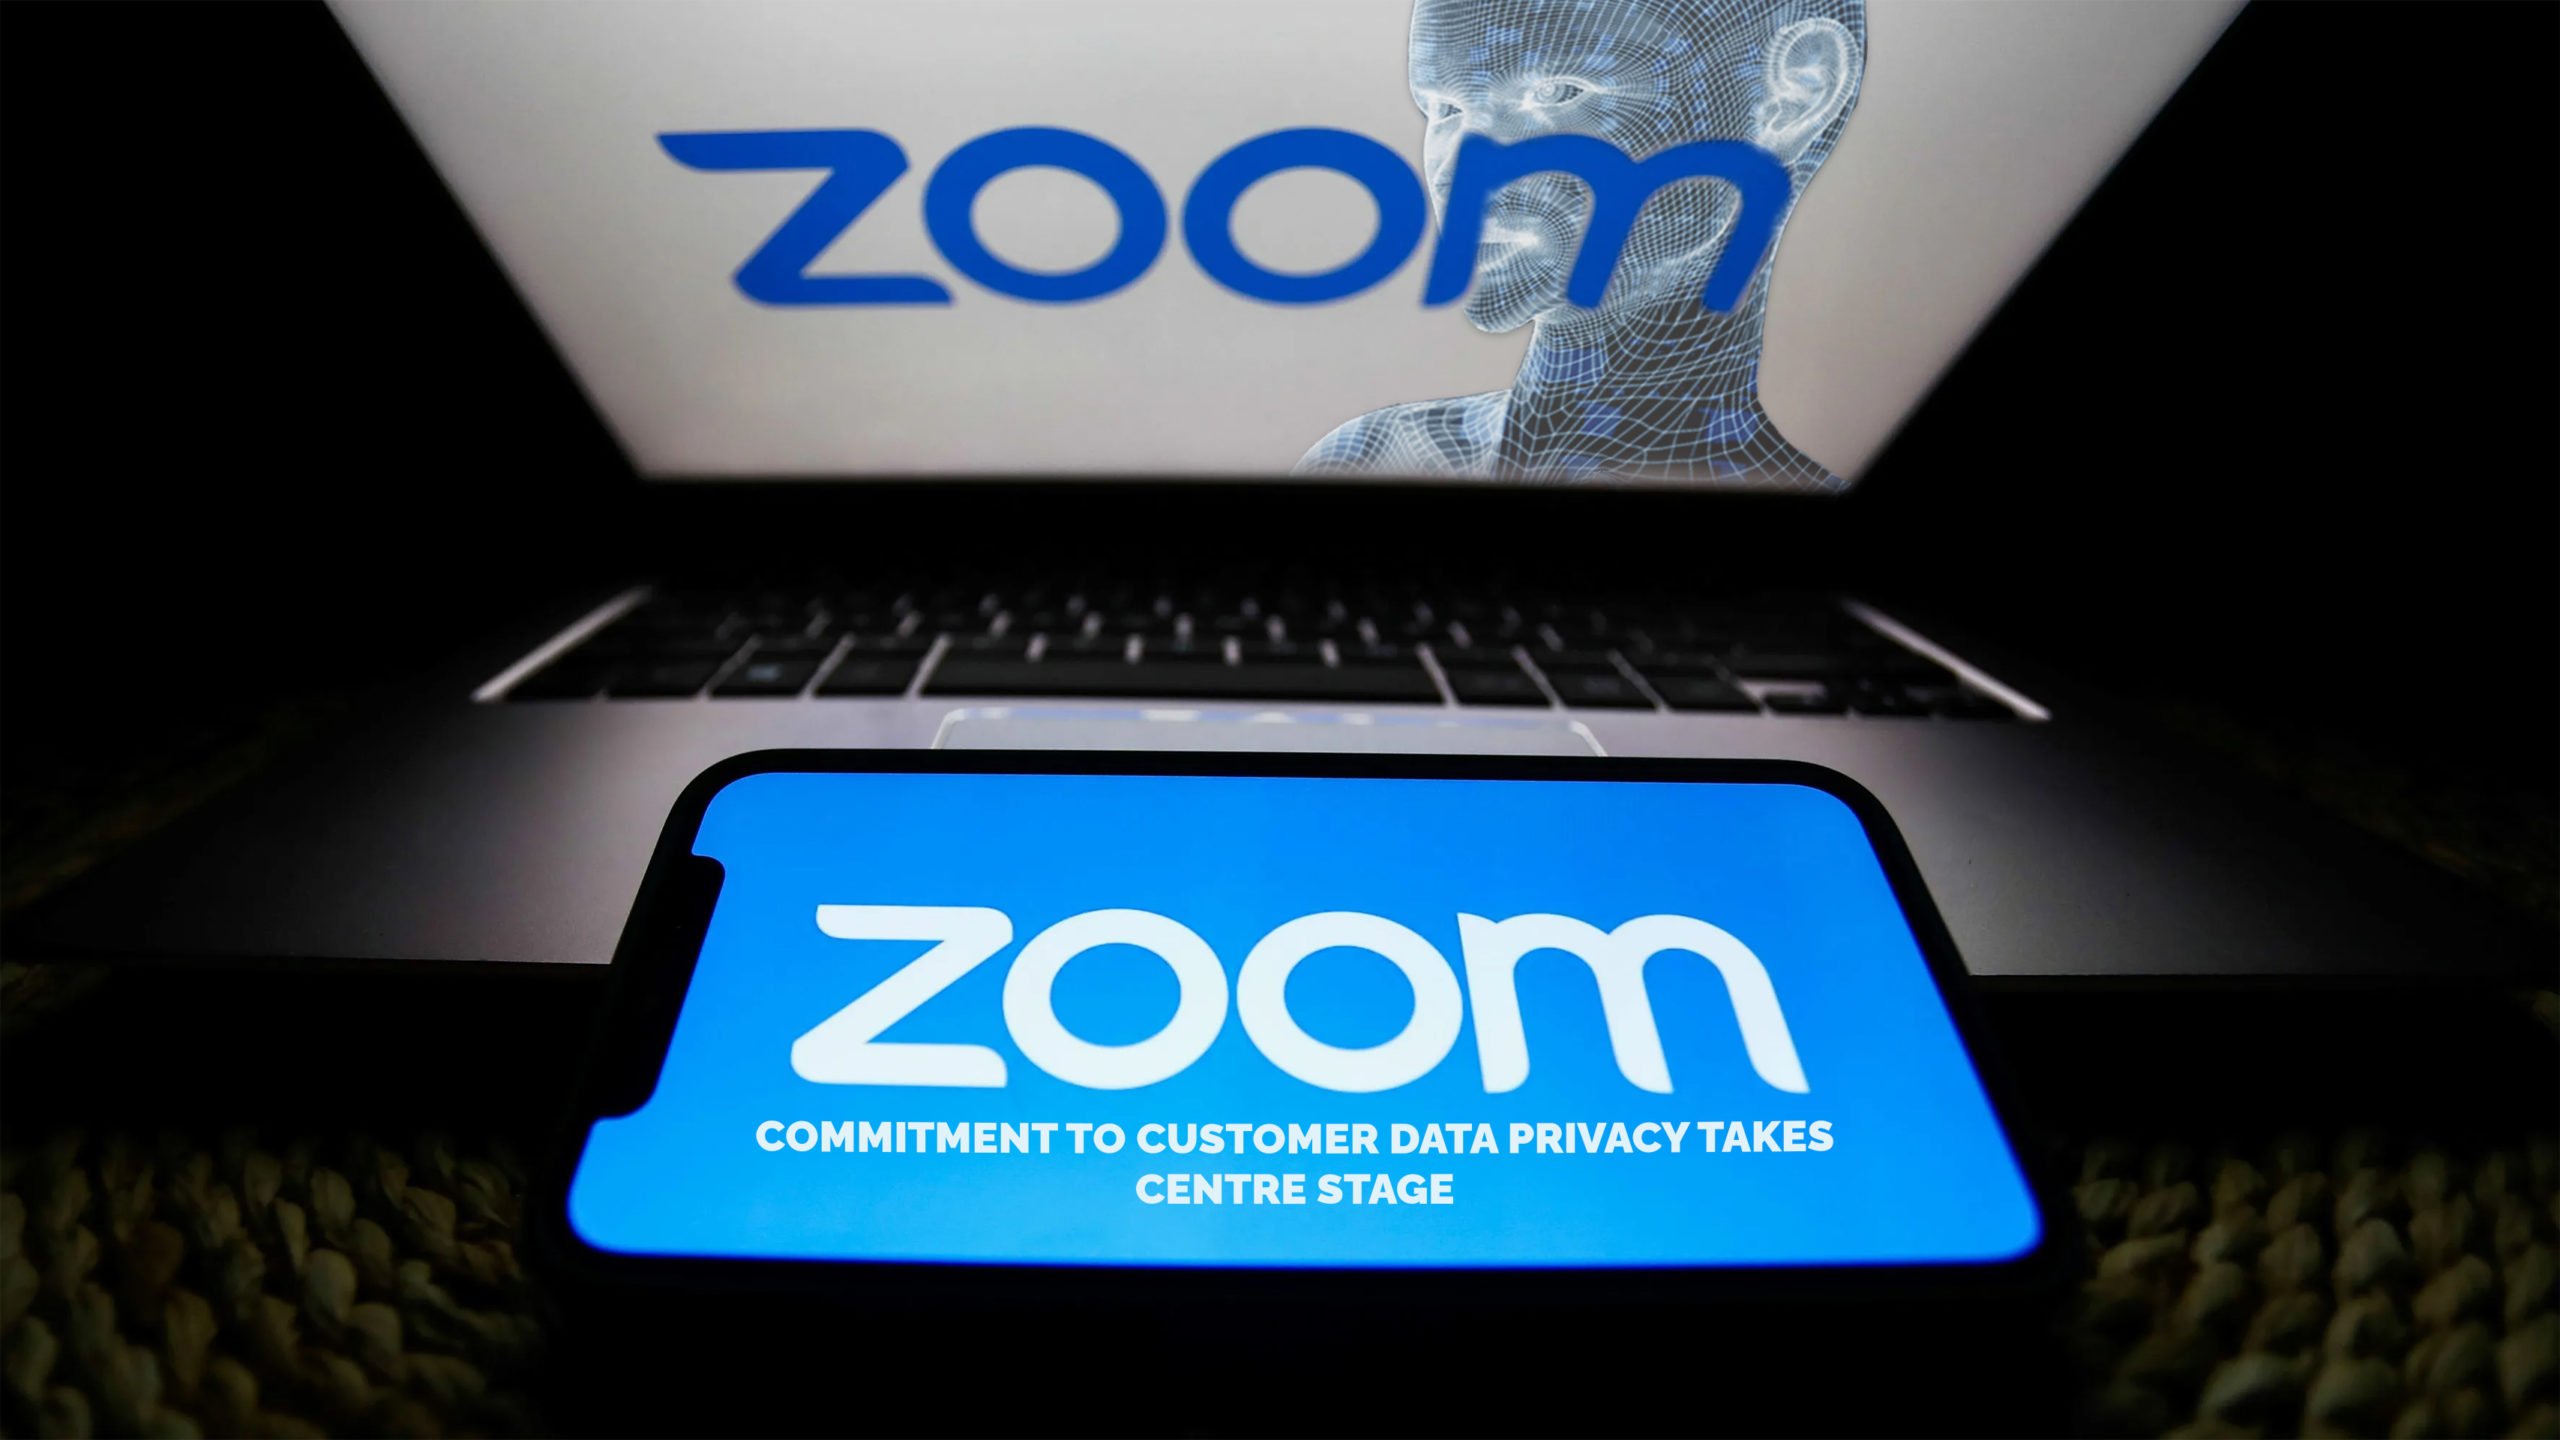 Zoom Reverses Policy: Commitment to Customer Data Privacy Takes Centre Stage